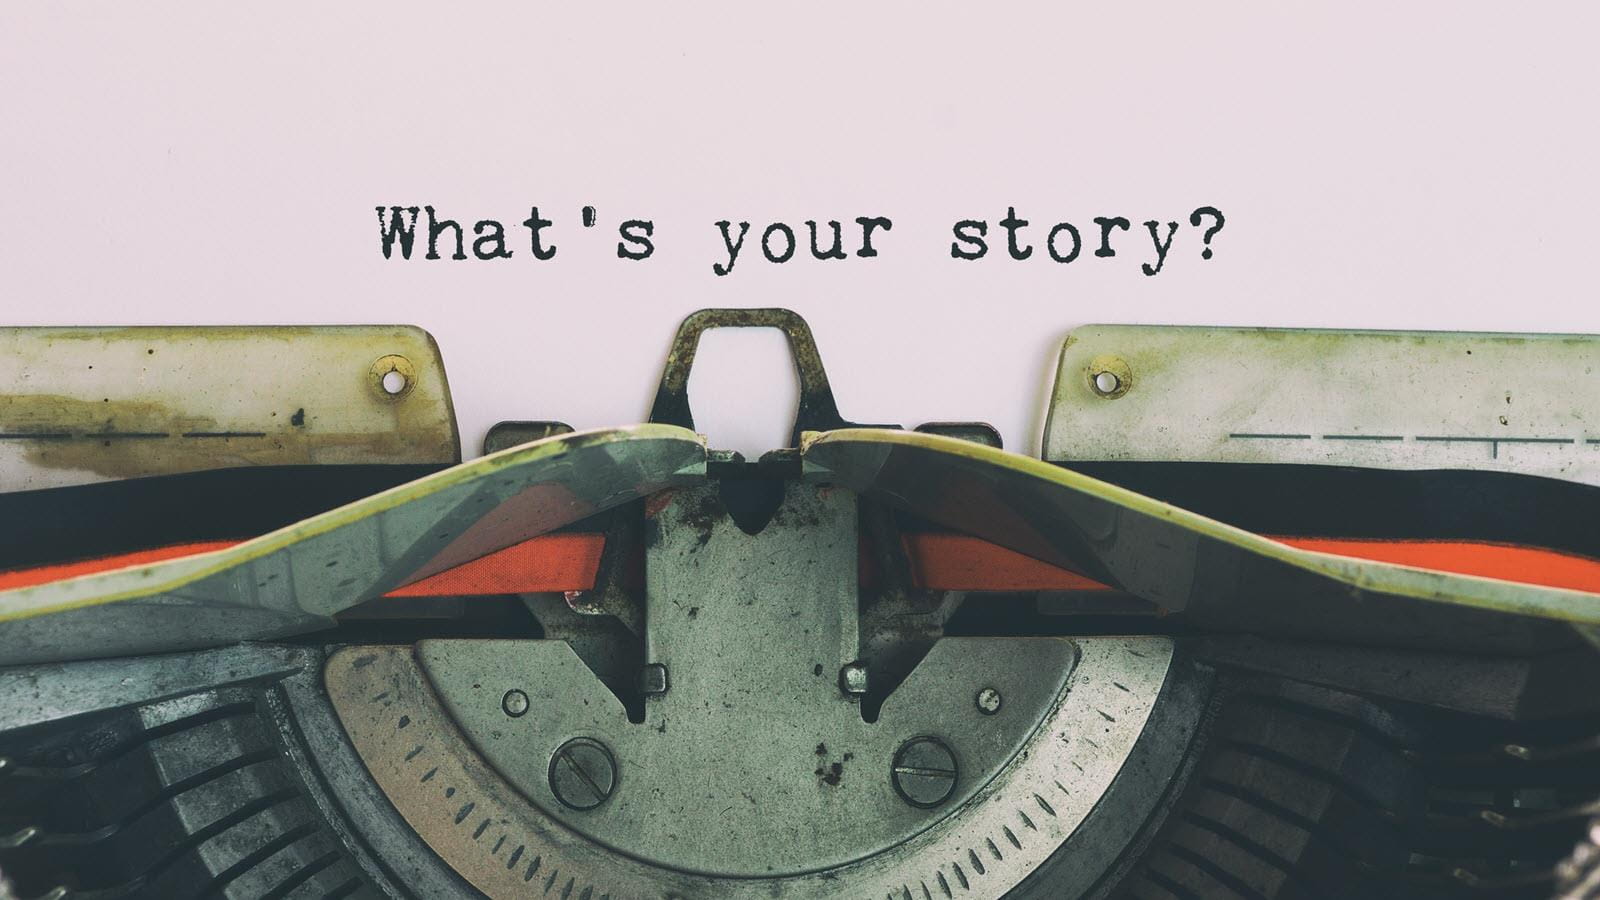 Paper in a typewriter that says "What's your story?"